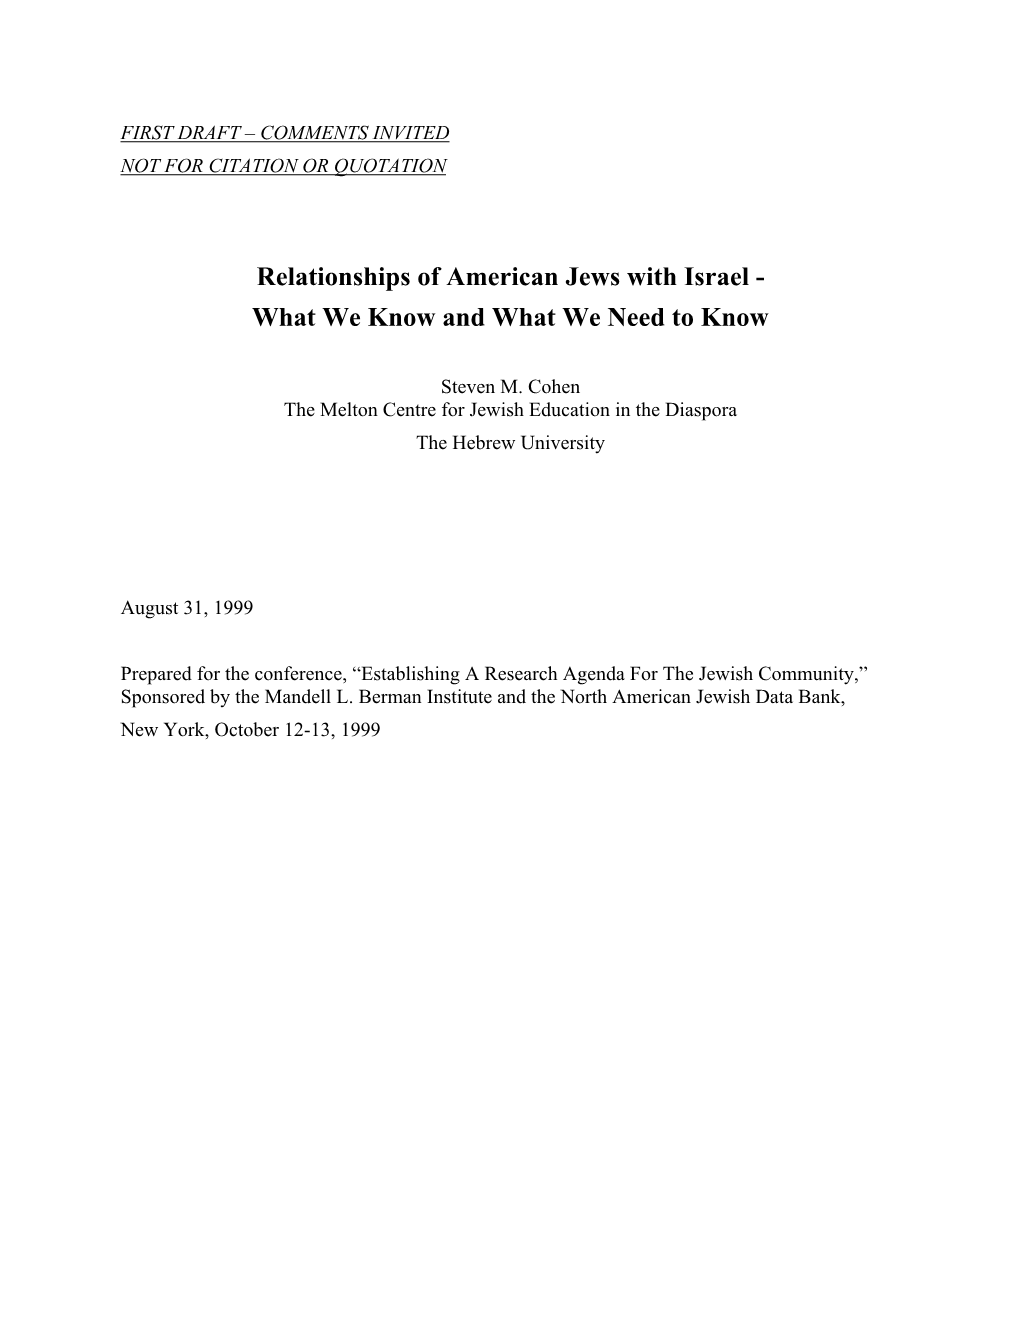 Relationships of American Jews with Israel - What We Know and What We Need to Know